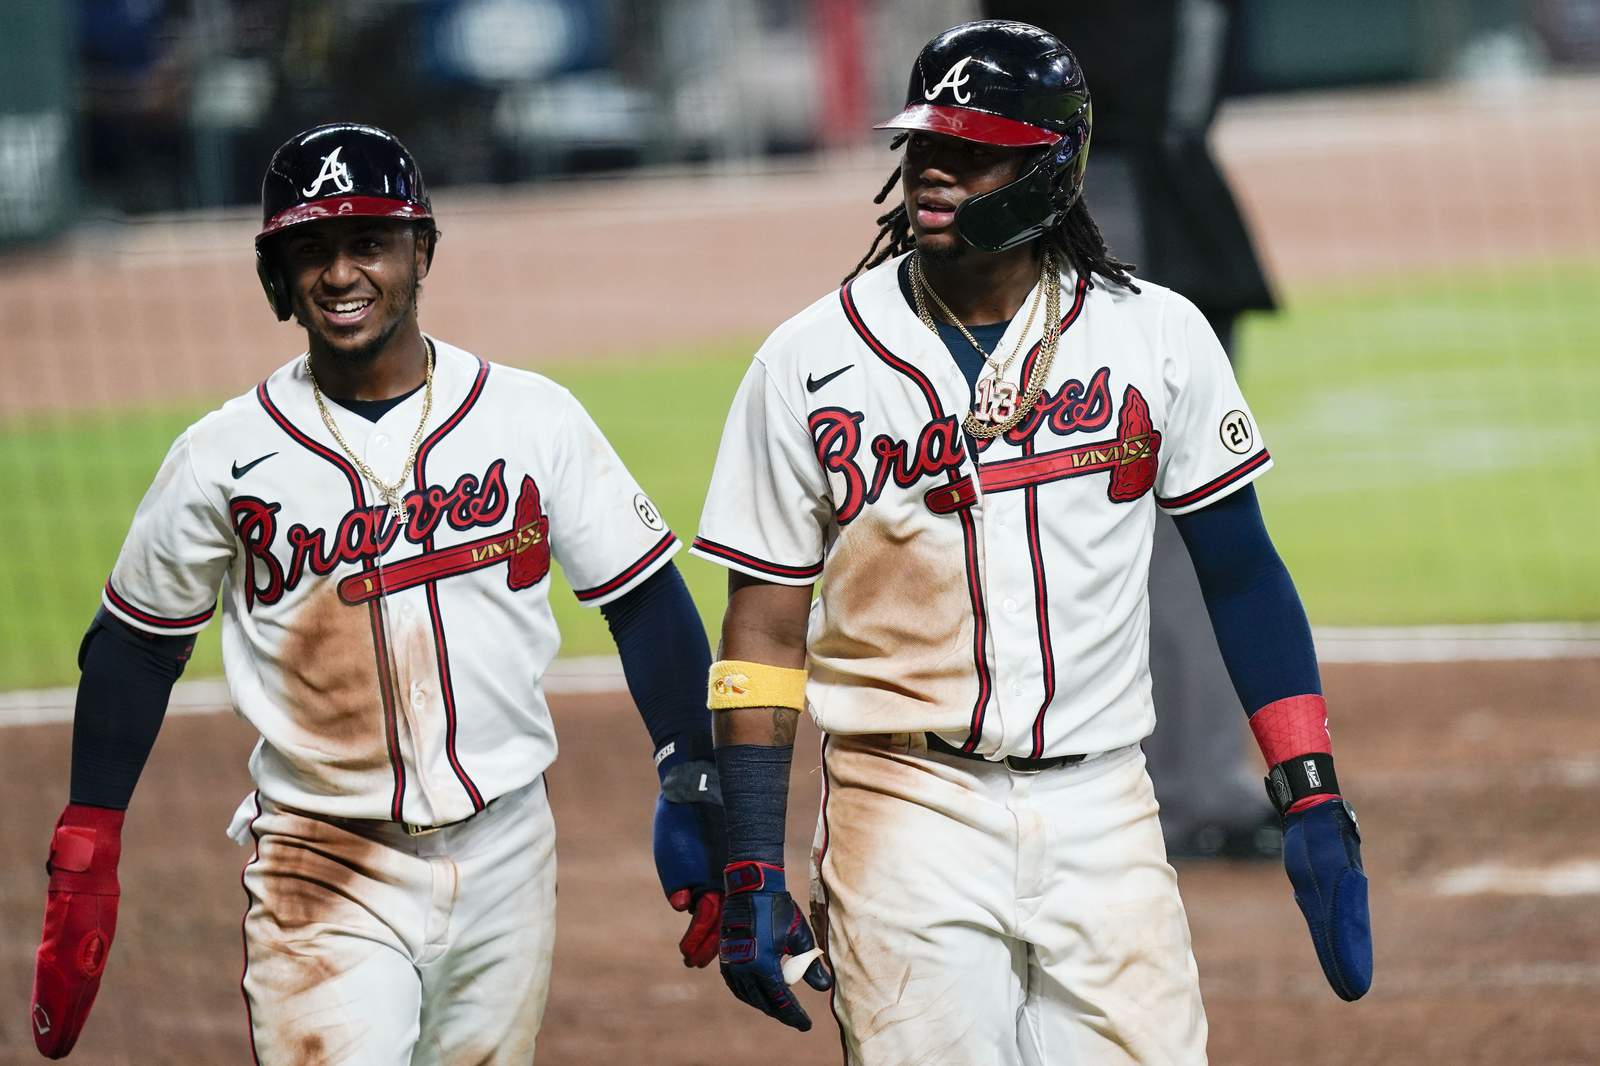 Braves quickly set franchise mark for most runs in game